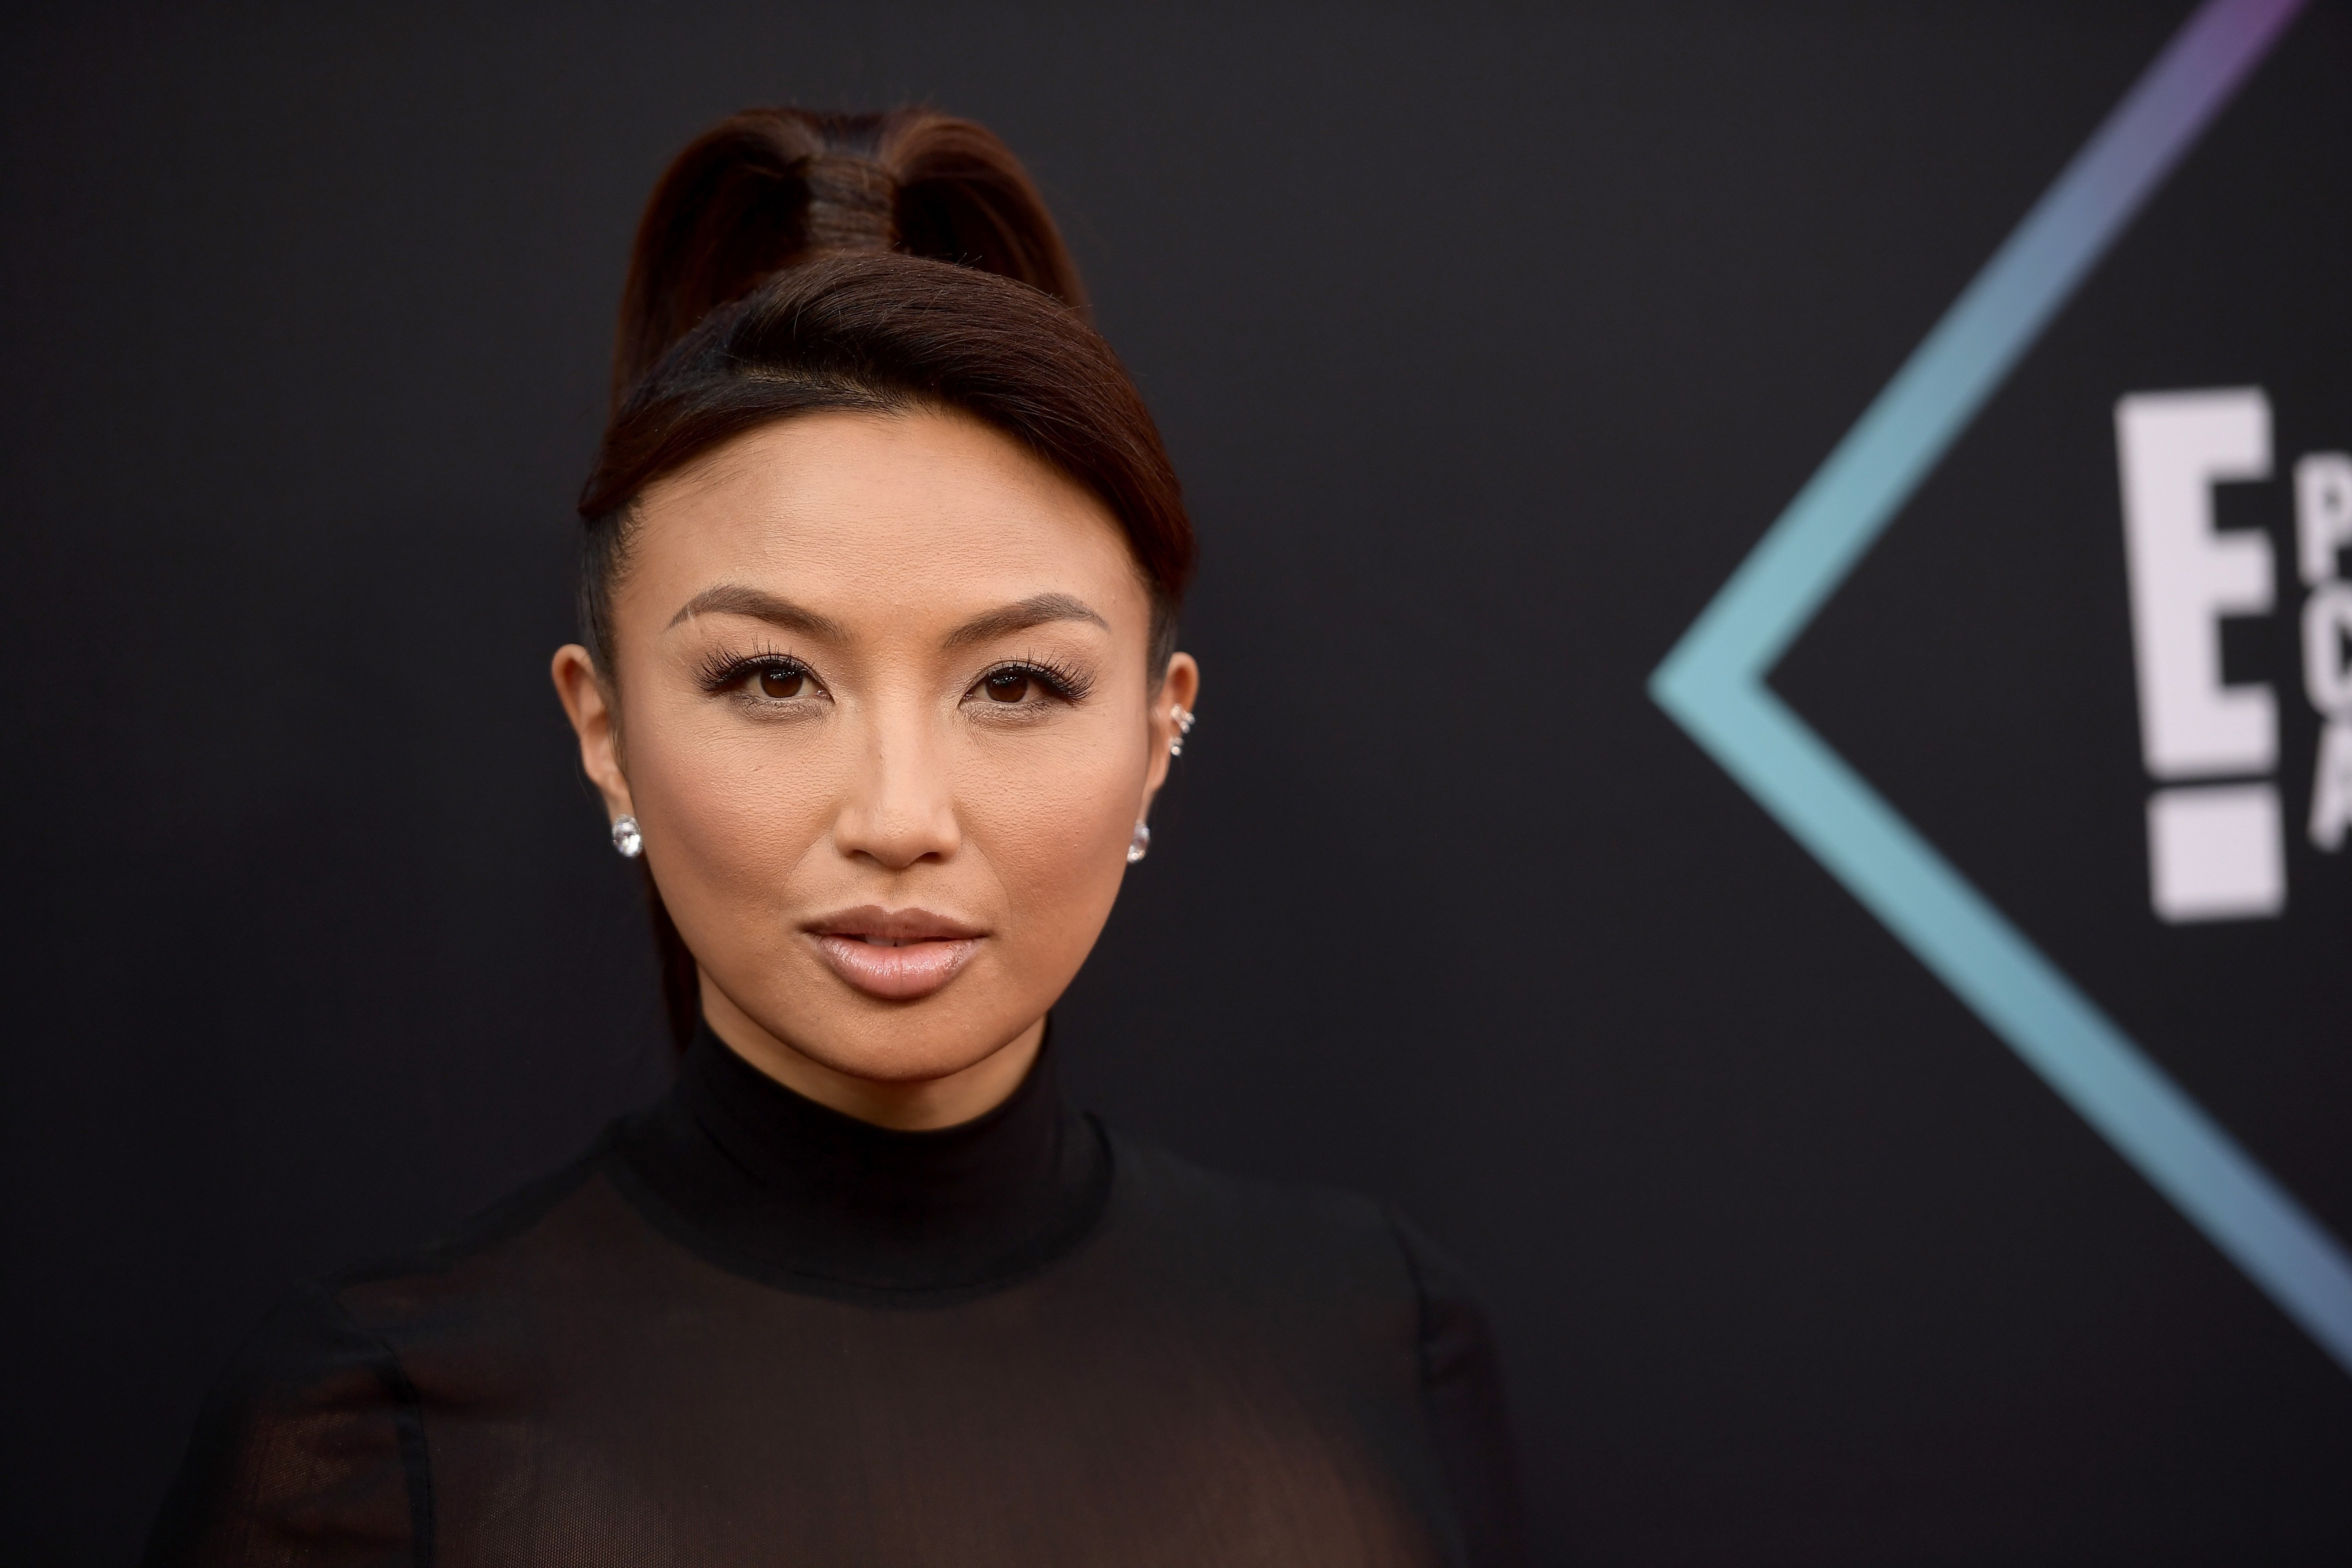 Jeannie Mai attends the People's Choice Awards 2018 at Barker Hangar on November 11, 2018 | Photo: GettyImages